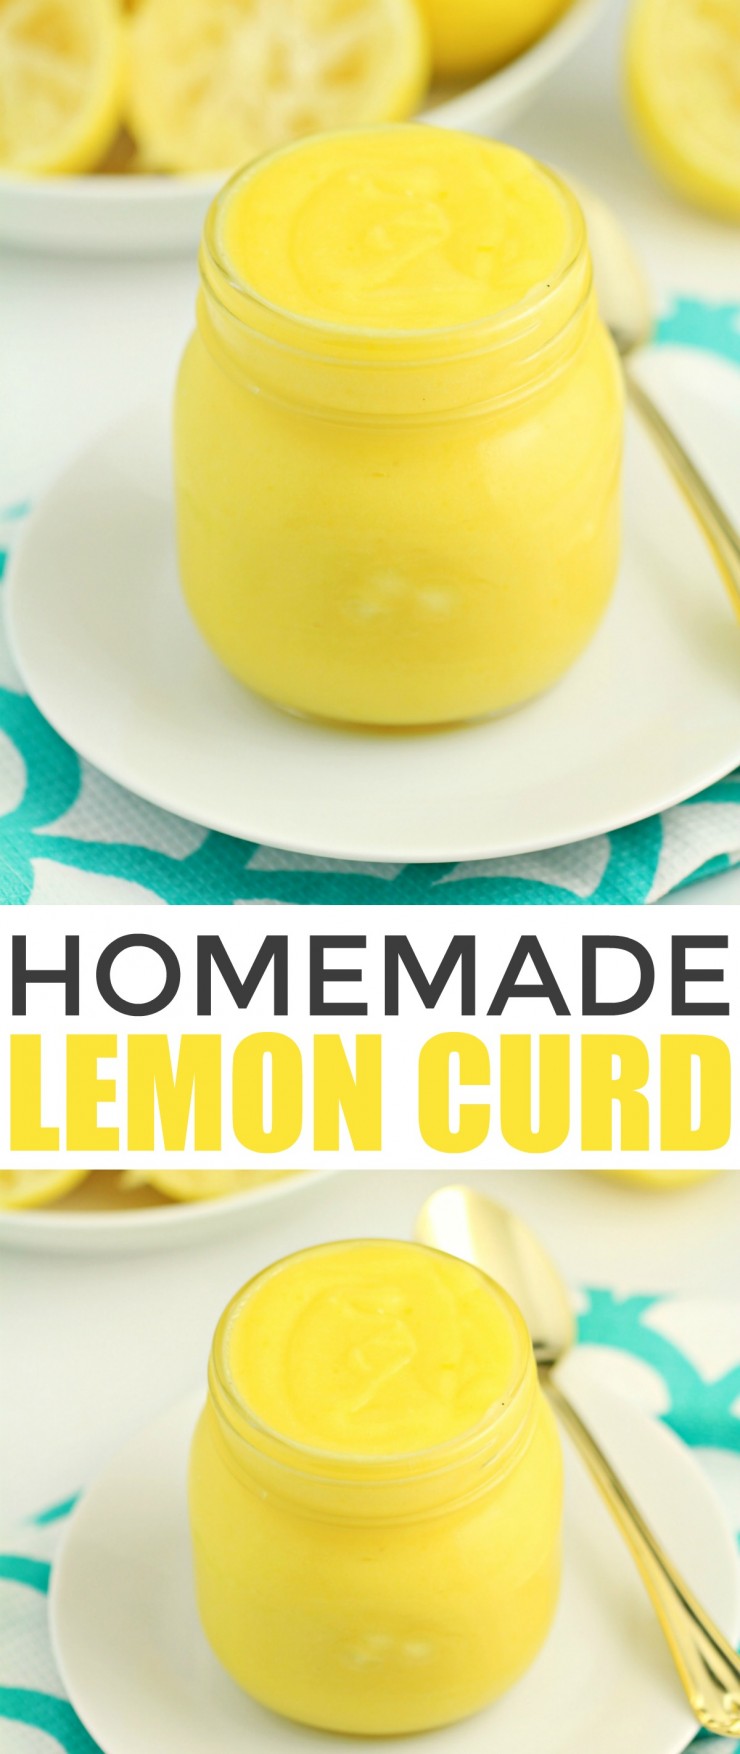 Perfectly tart, this classic lemon curd recipe works well in desserts like lemon meringue pie but is also perfection spread on scones with a cup of tea.